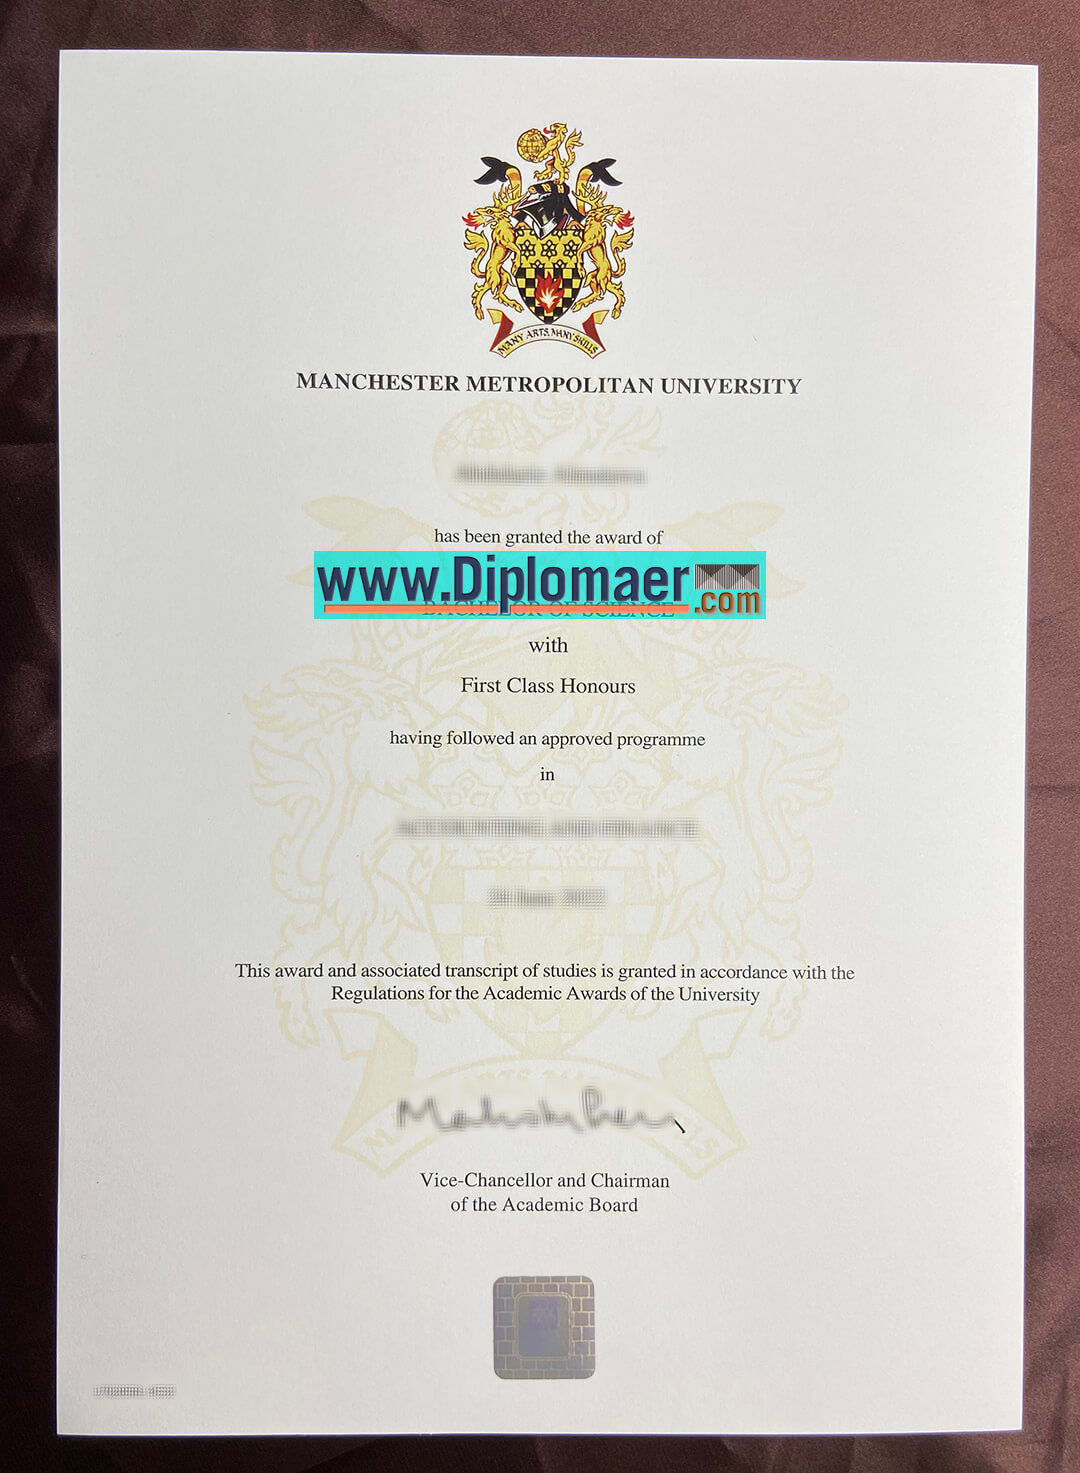 Manchester Metropolitan University Fake Diploma - How to quickly buy a fake certificate from Manchester Metropolitan University？